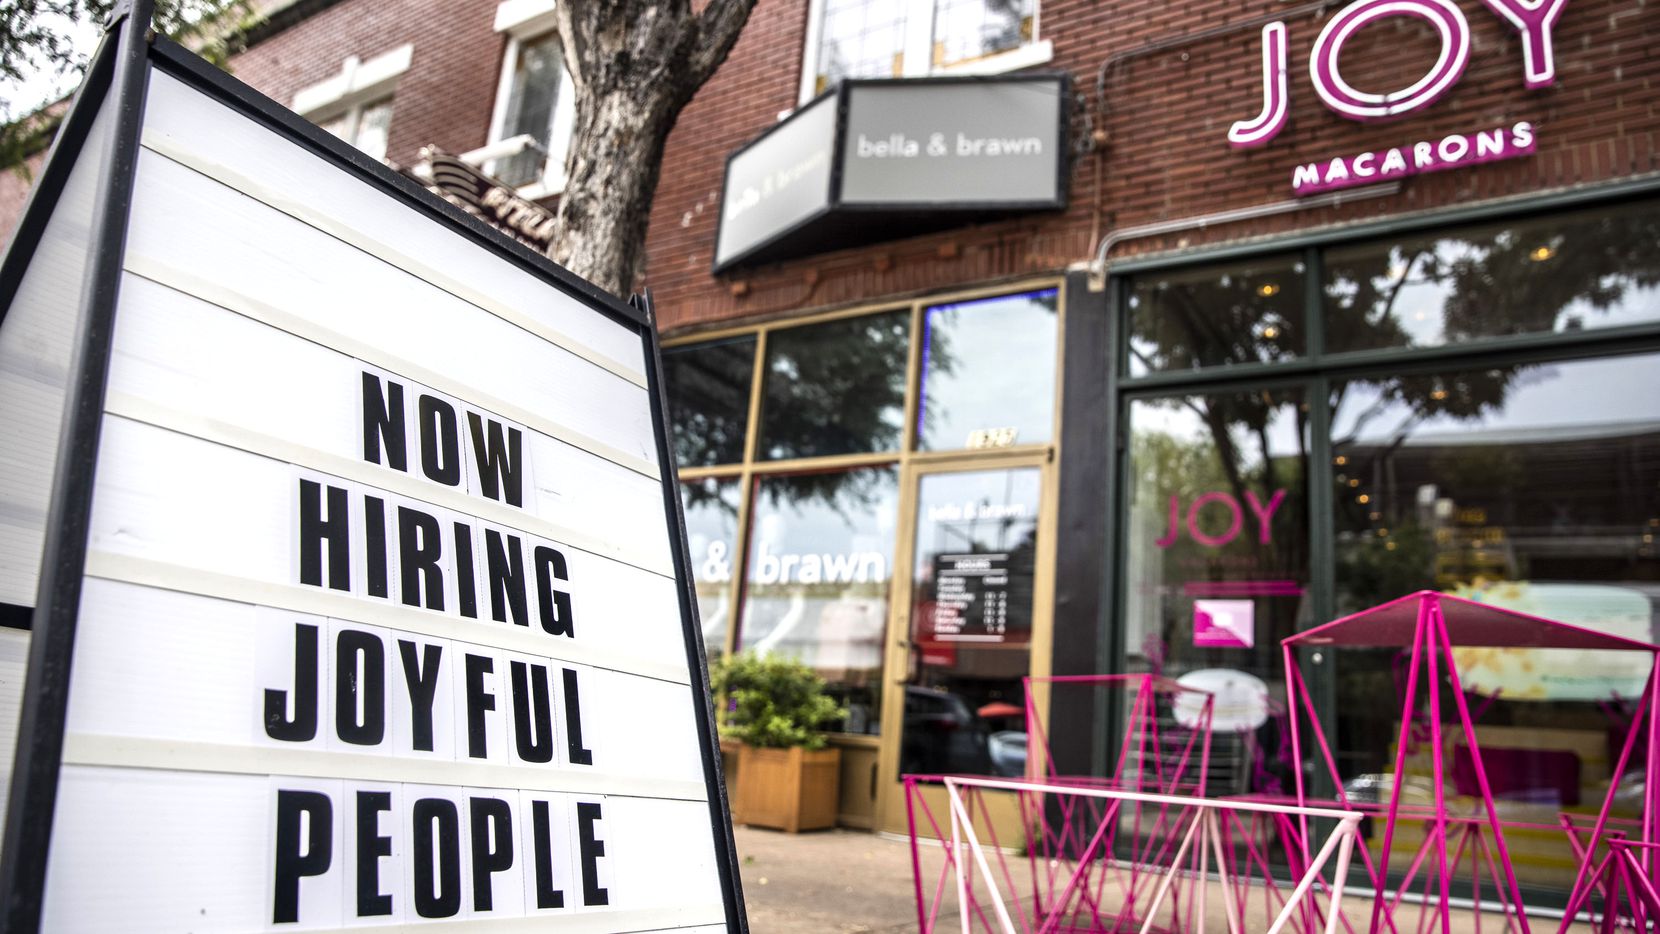 A “Now Hiring” sign stood outside JOY Macarons in Dallas earlier this summer.